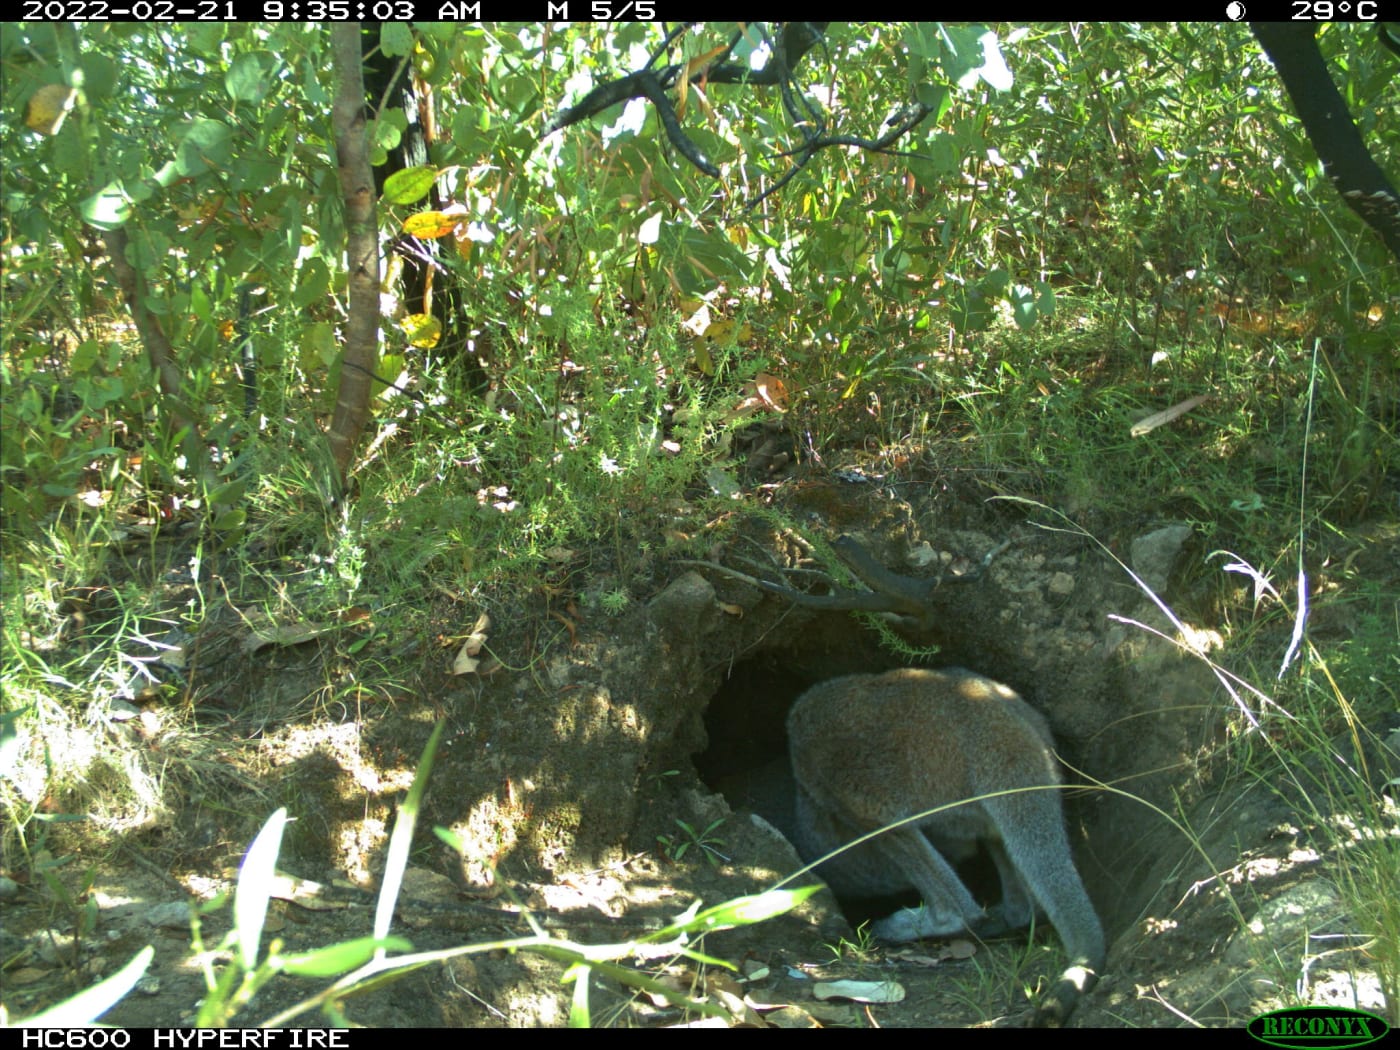 Red-necked wallaby inspects a wombat burrow.